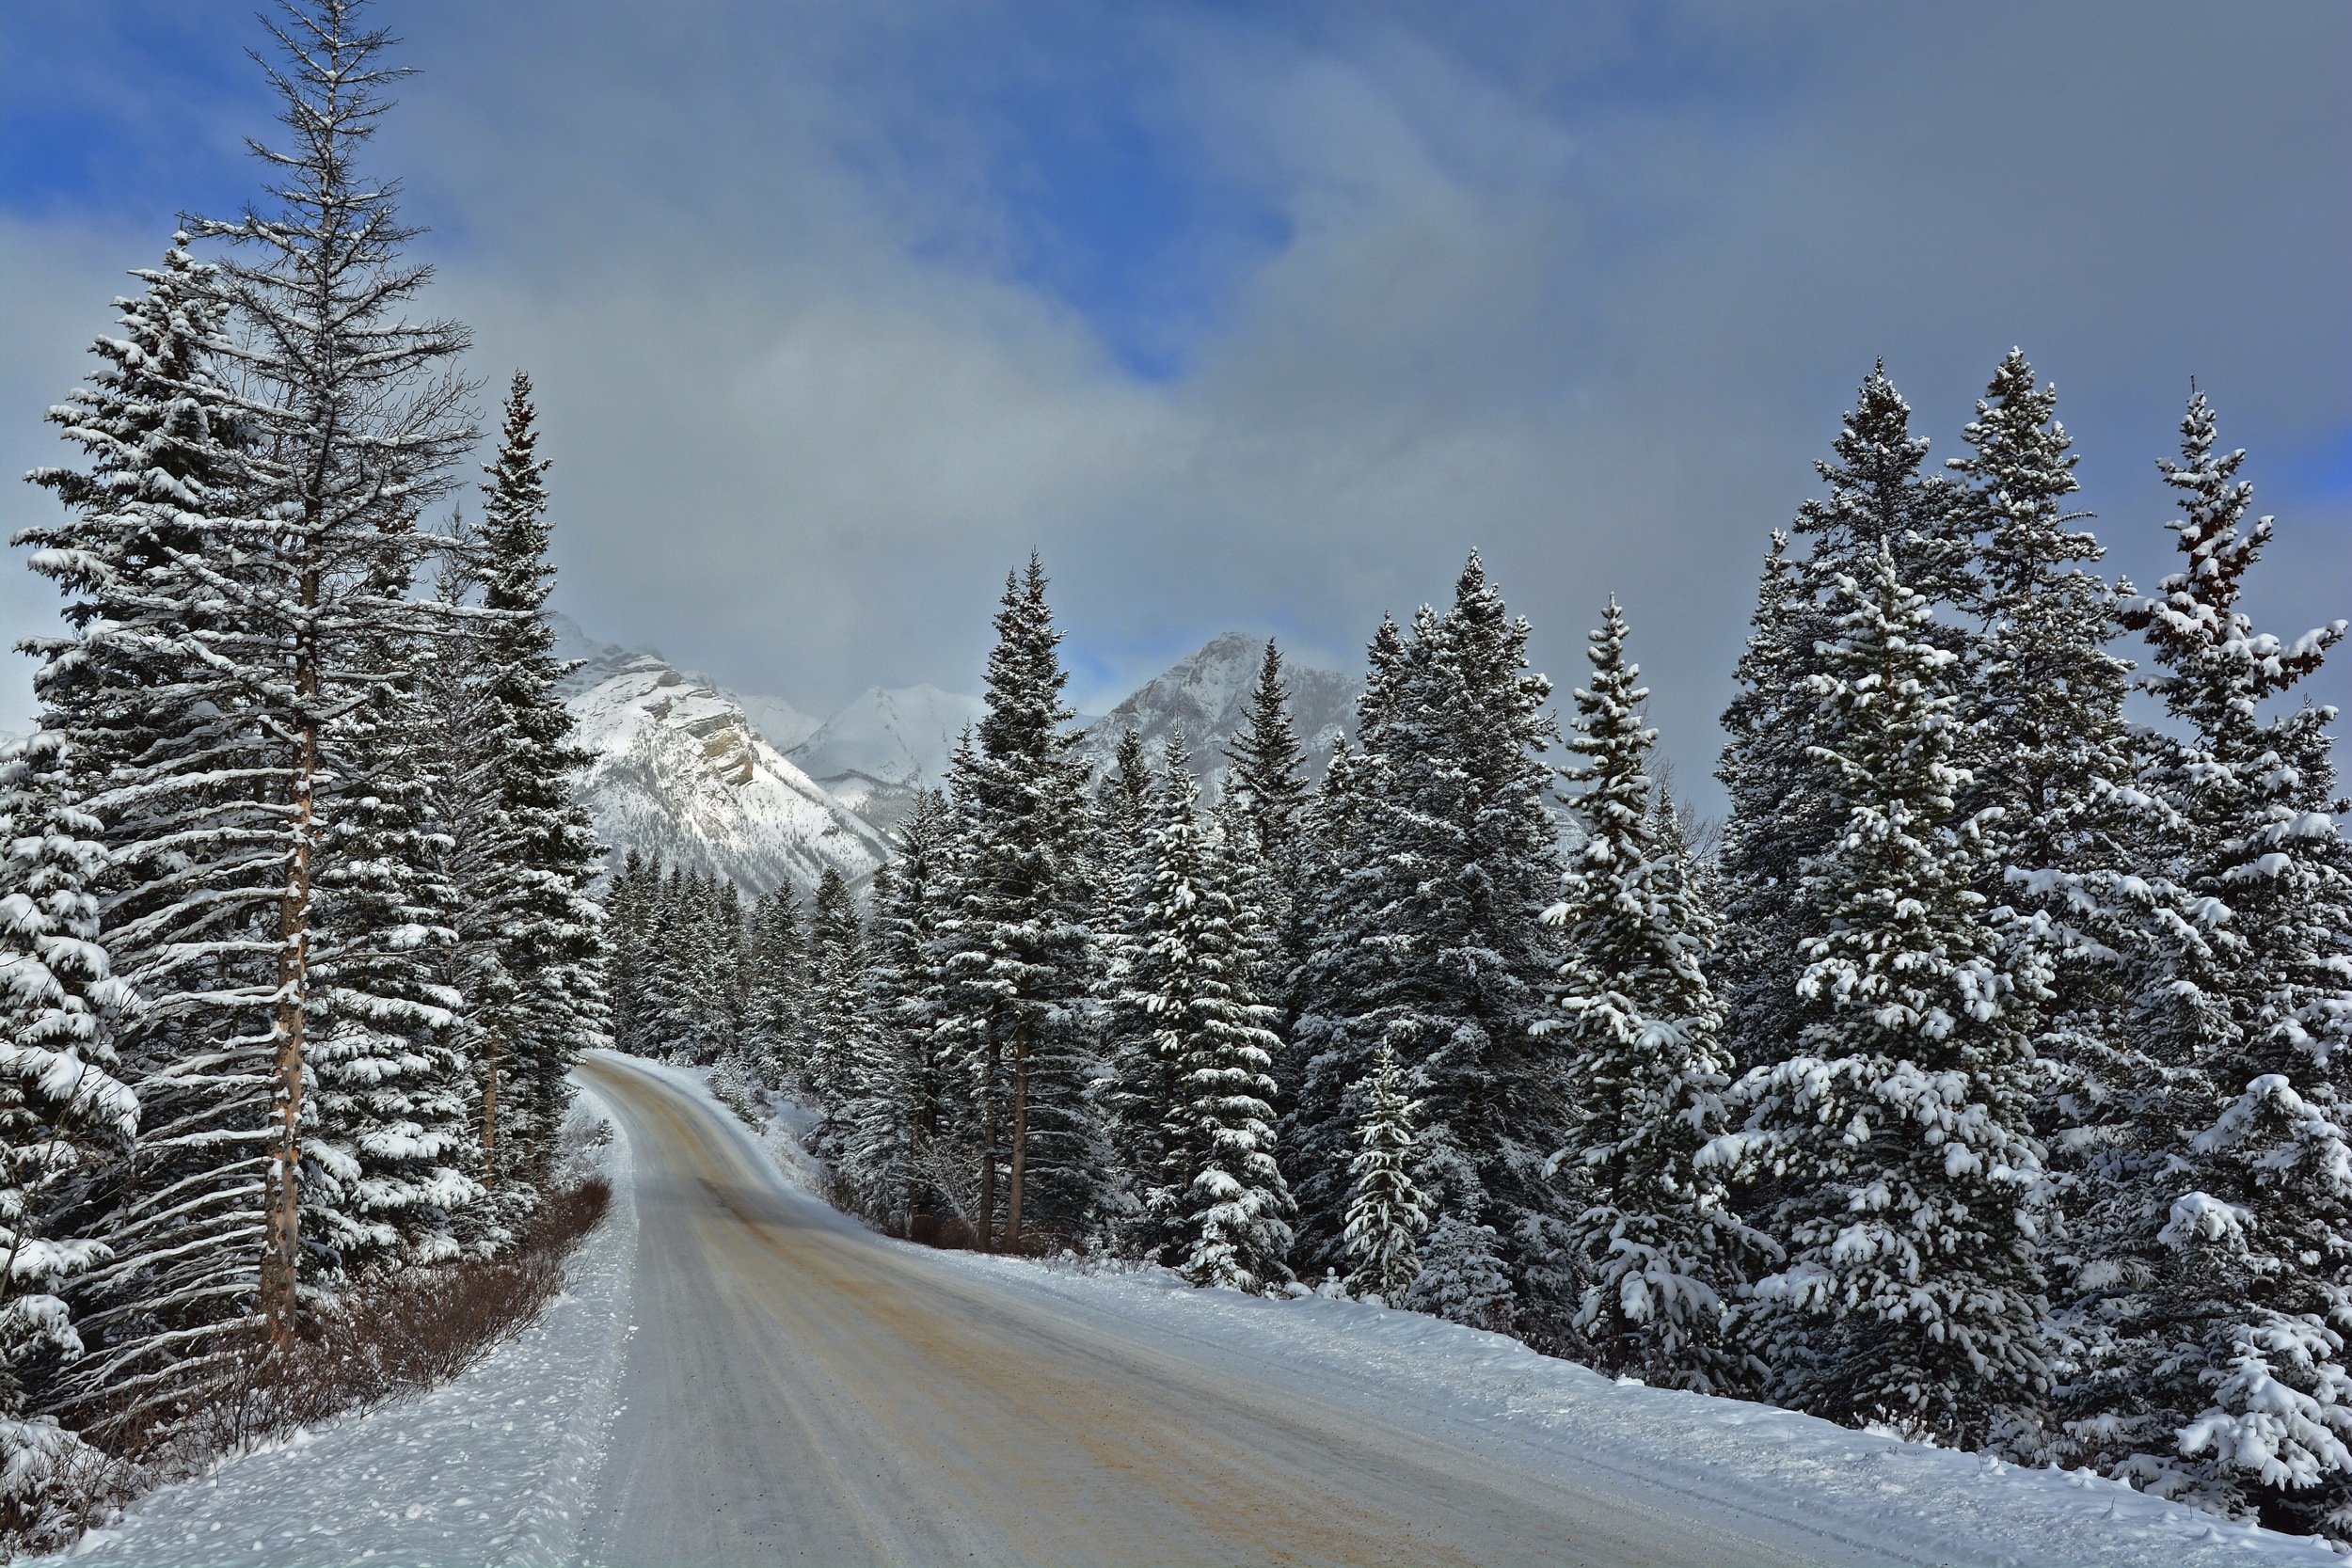 man made, road, banff national park, canada, landscape, mountain, pine, snow, tree, winter iphone wallpaper